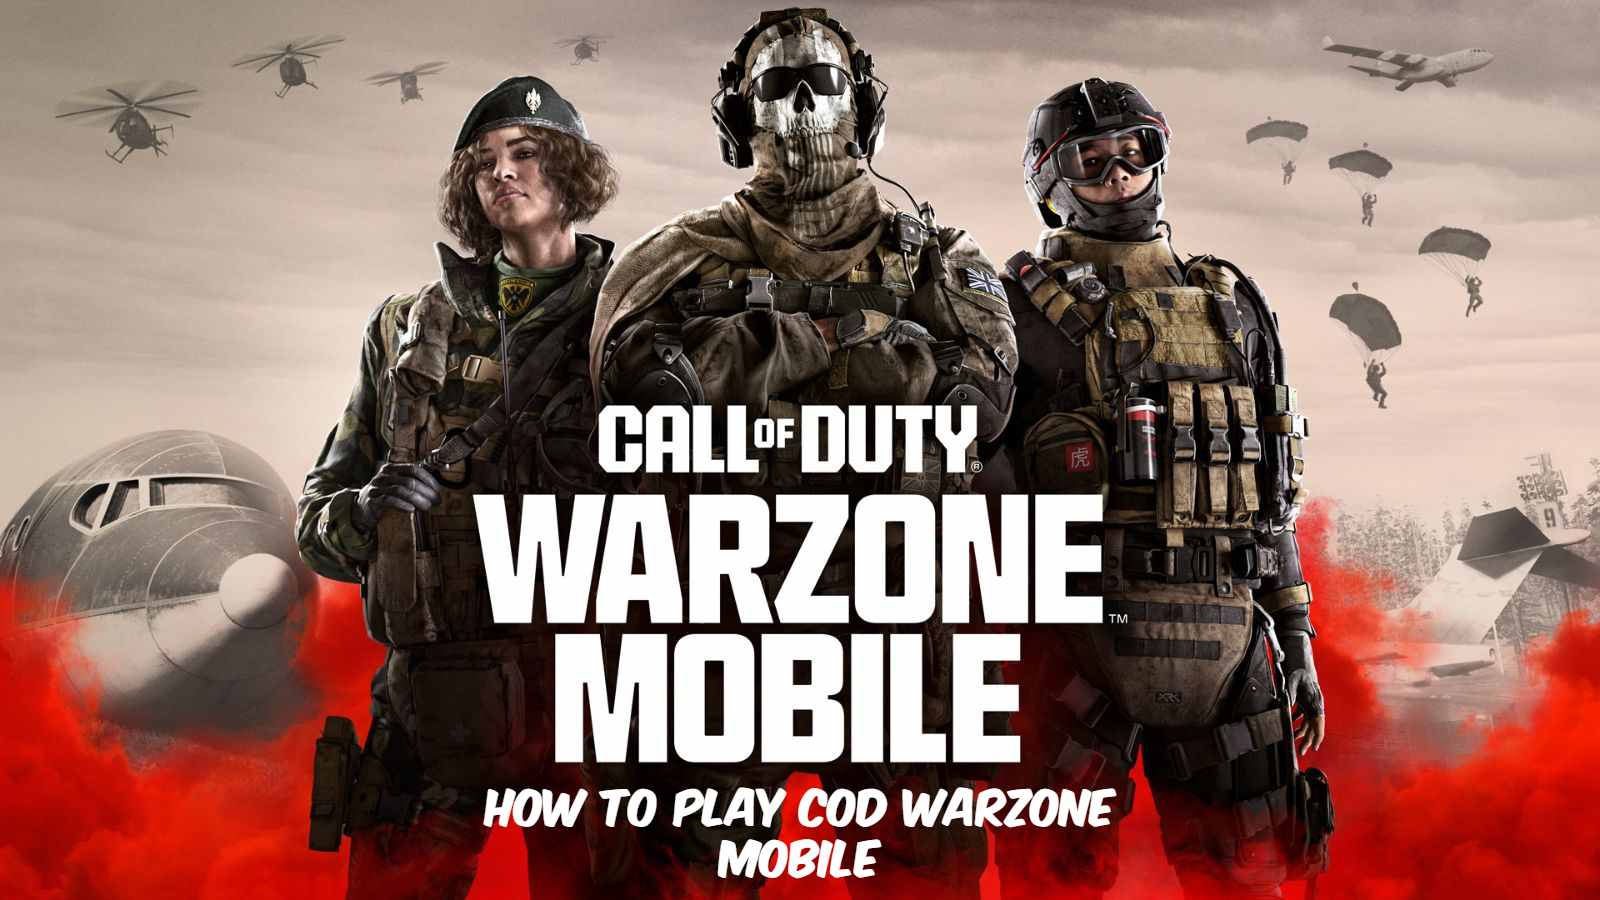 How To Play COD Warzone Mobile on PC